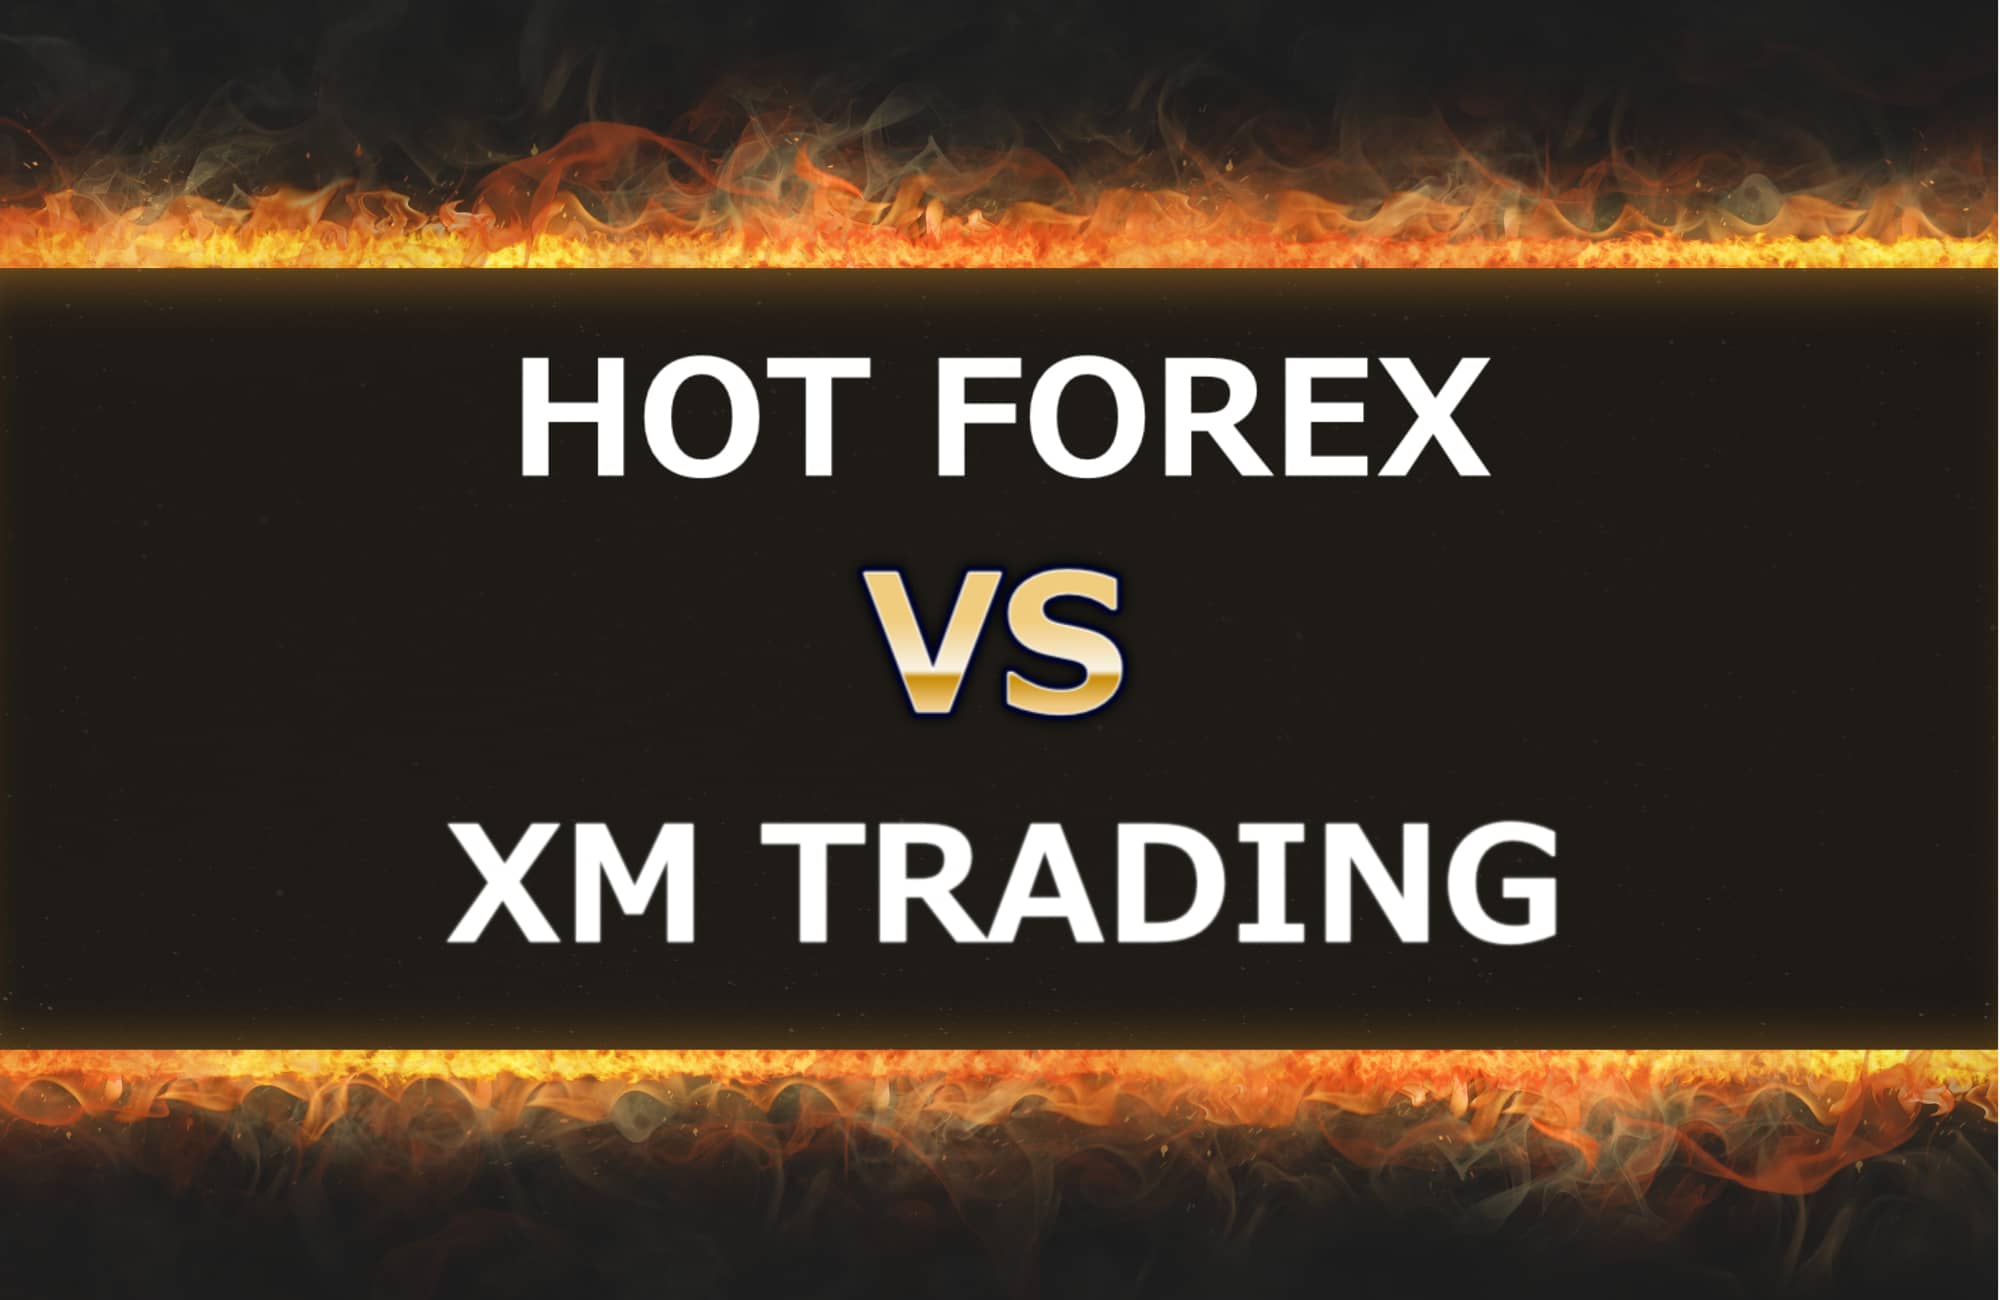 HOT FOREXとXM TRADINGの比較